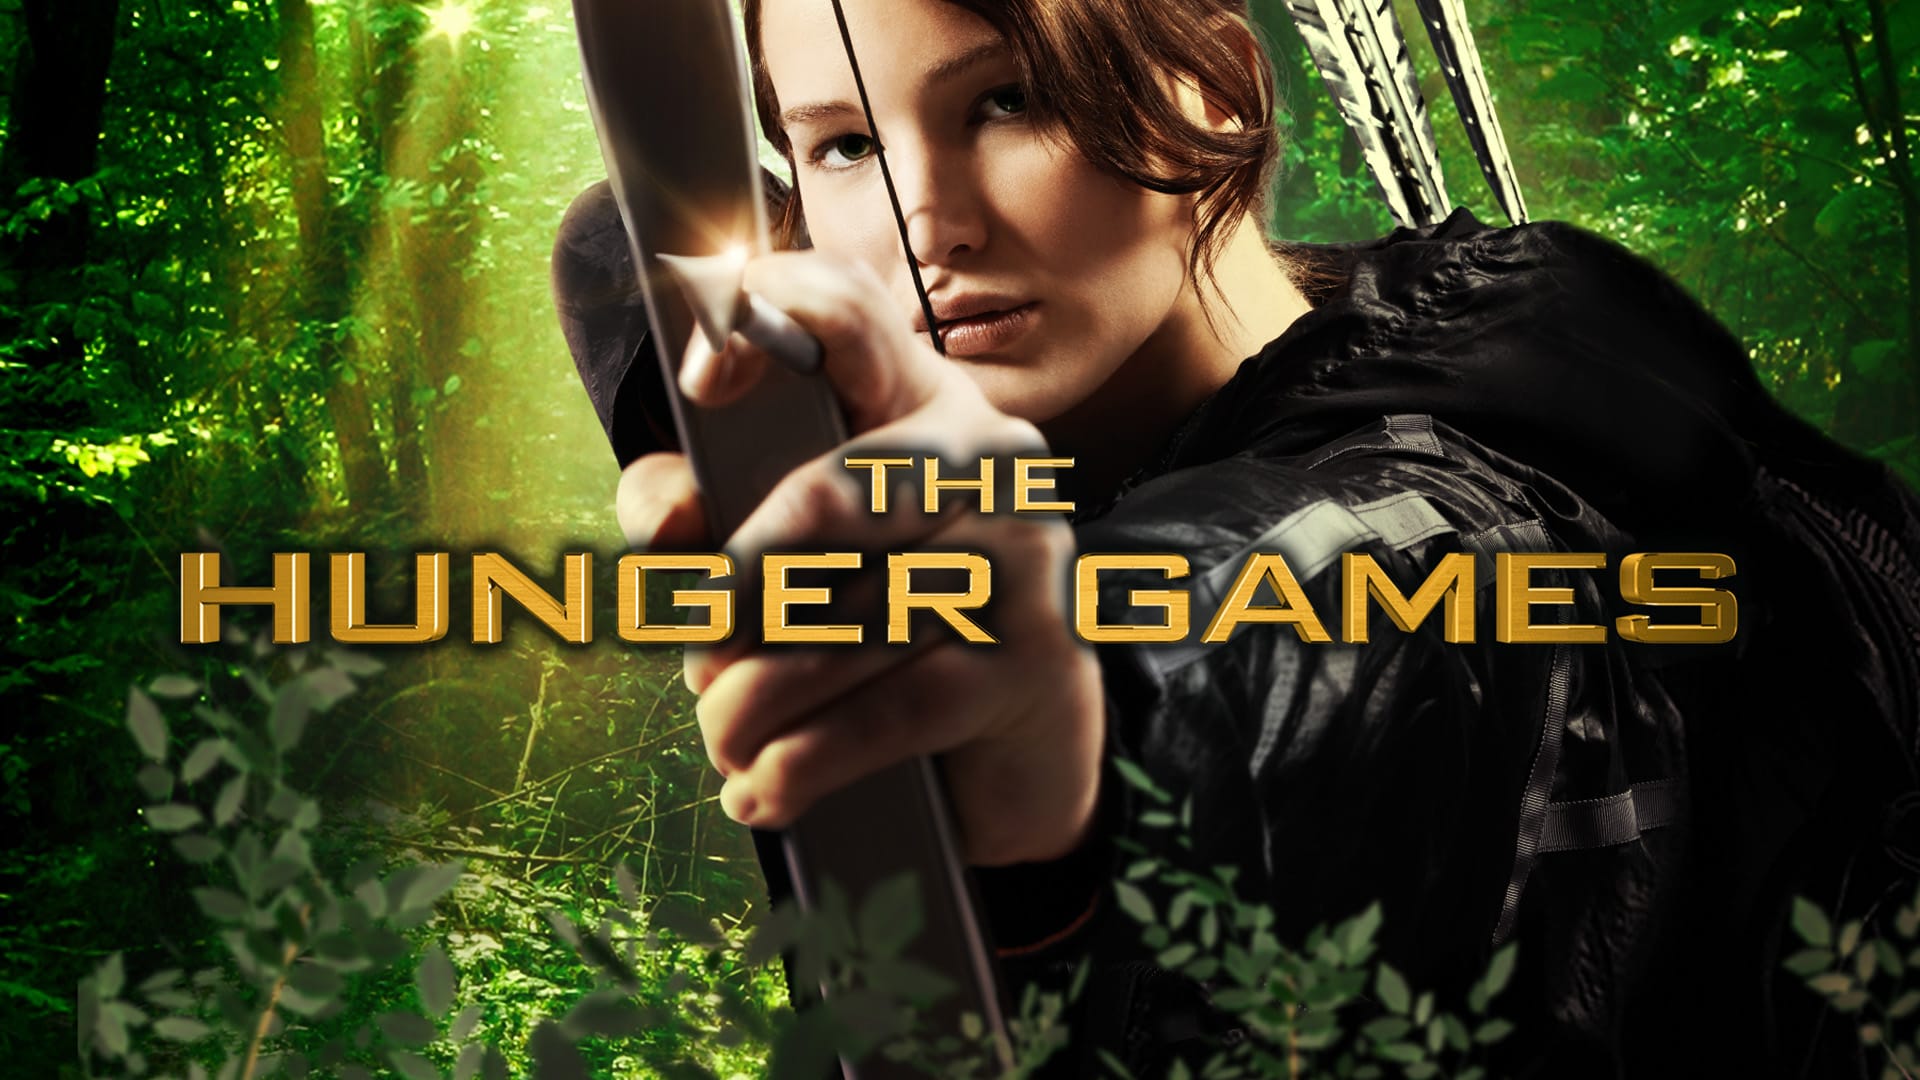 Watch The Hunger Games Online | Stream Full Movies